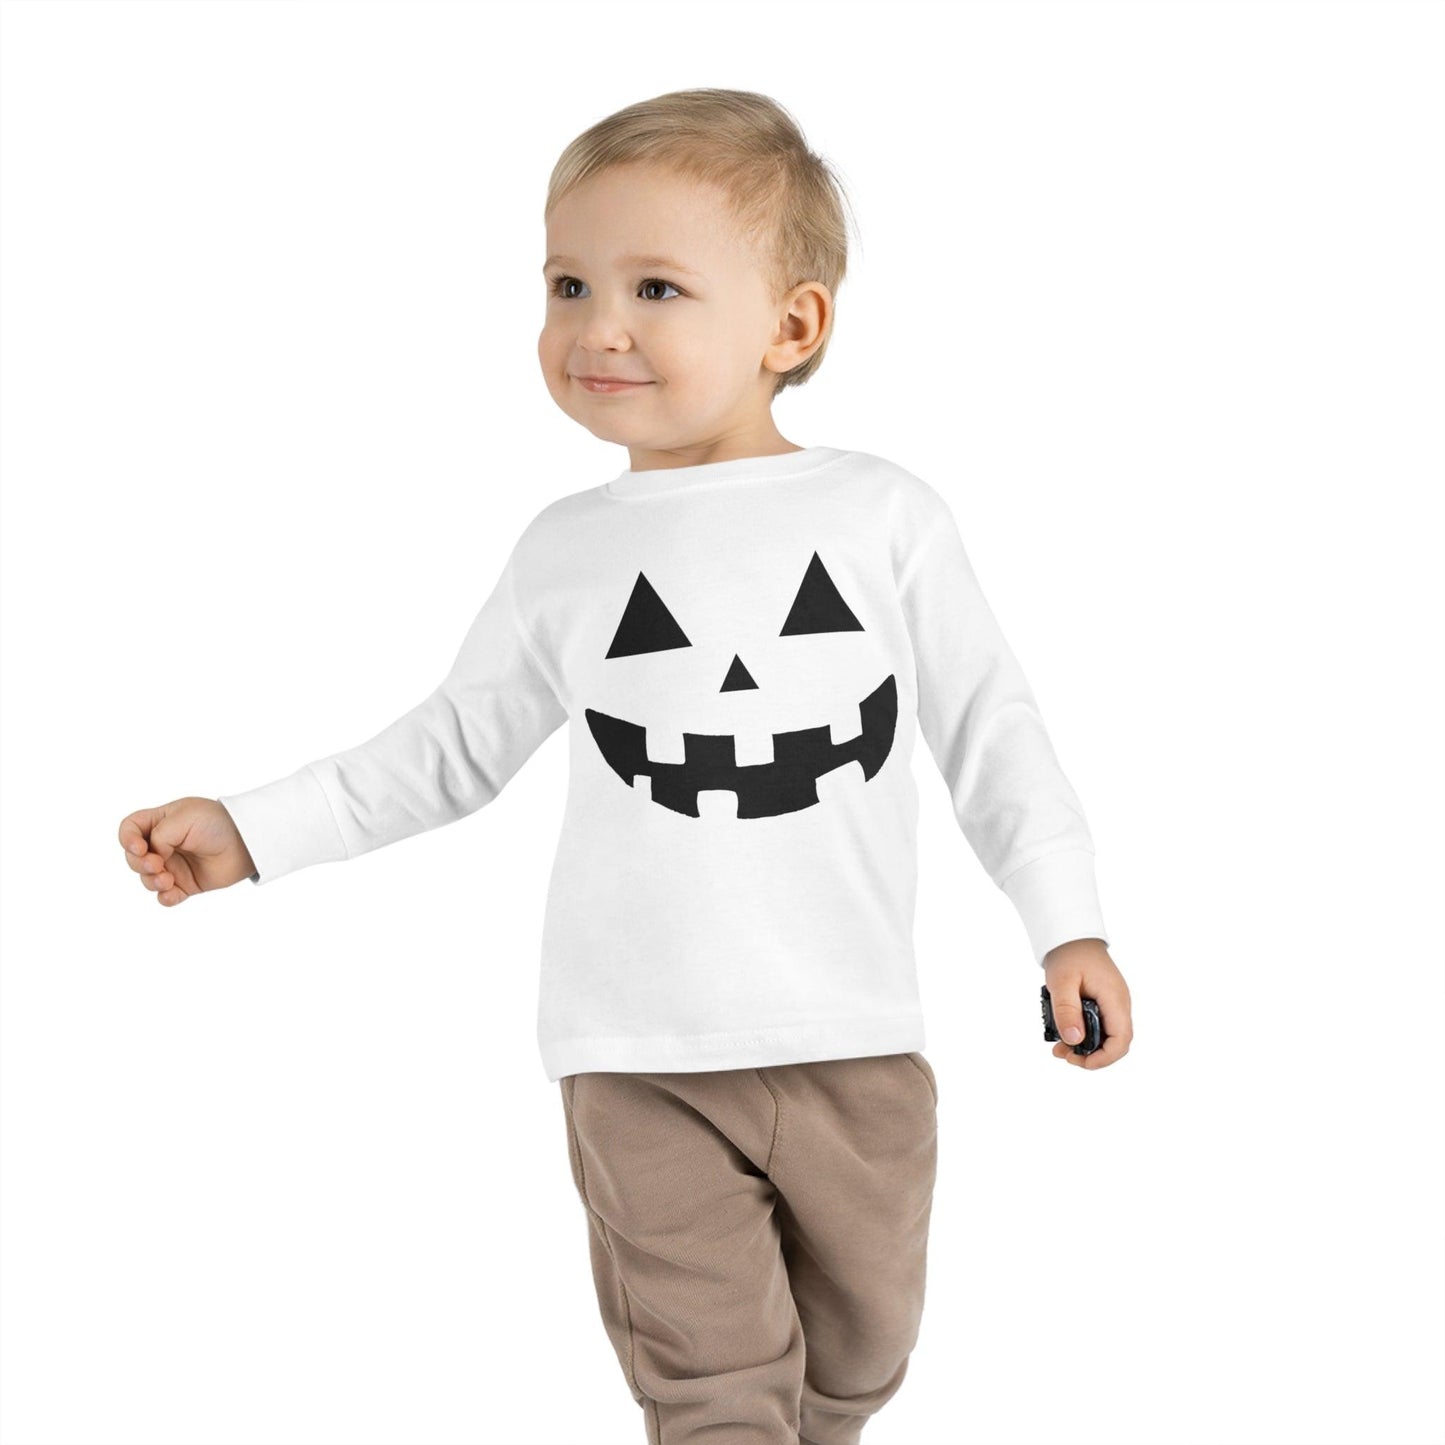 Kids Trick or Treat Outfit for Halloween Kids Scary Faces Halloween Pumpkin Face Shirt Kids Jack O Lantern Shirt Kids Halloween Shirt Kids Long Sleeve - Giftsmojo